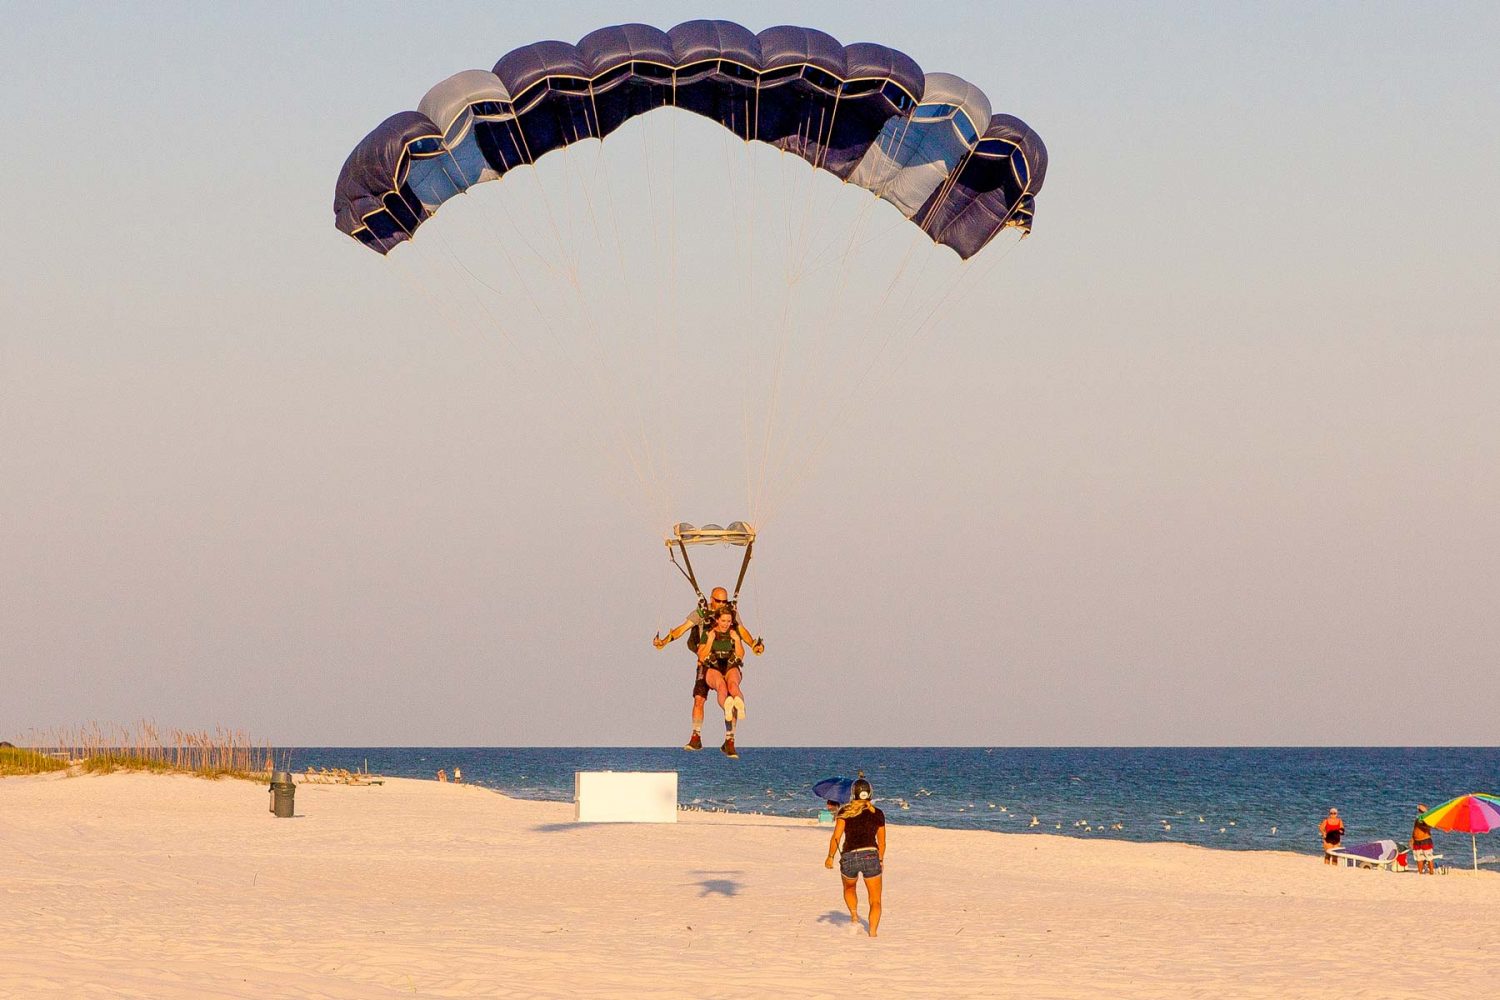 Tandem Skydiving Alabama Mobile & Gulf Shores Skydive The Gulf